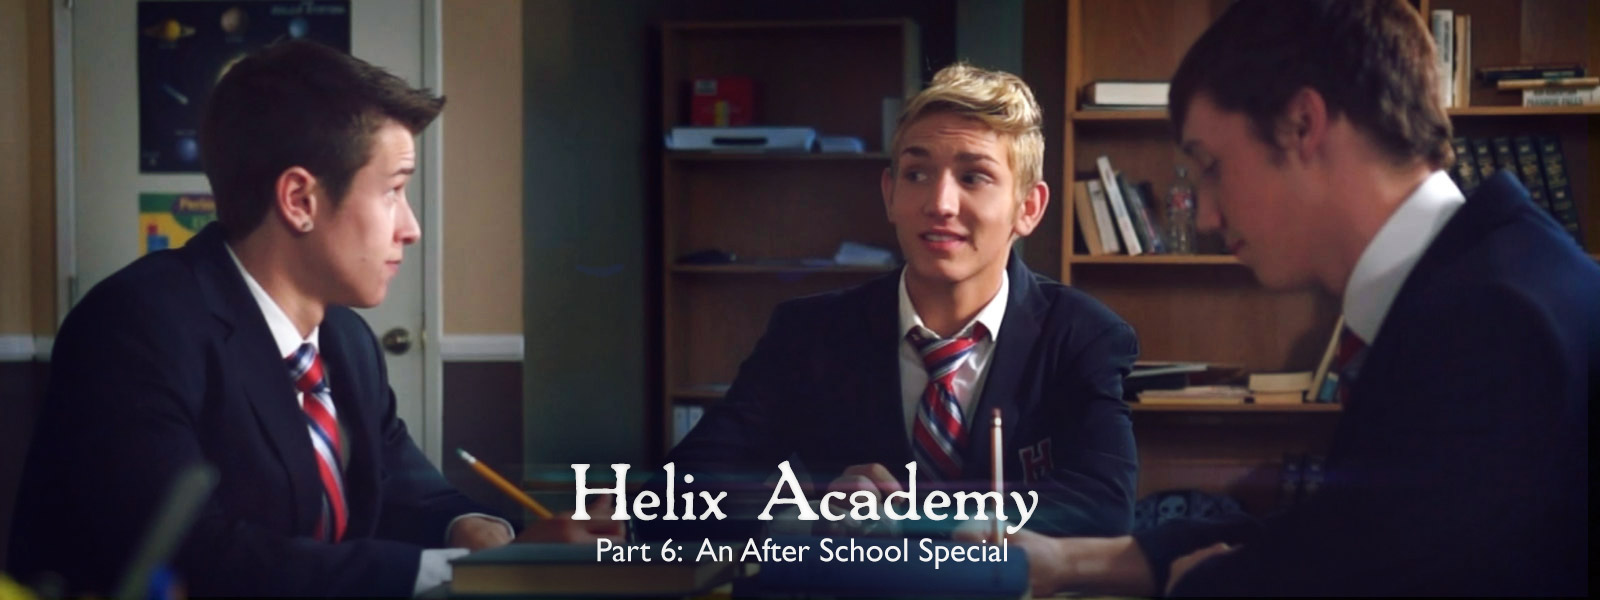 Helix Academy 2 | Episode 6: An After School Special